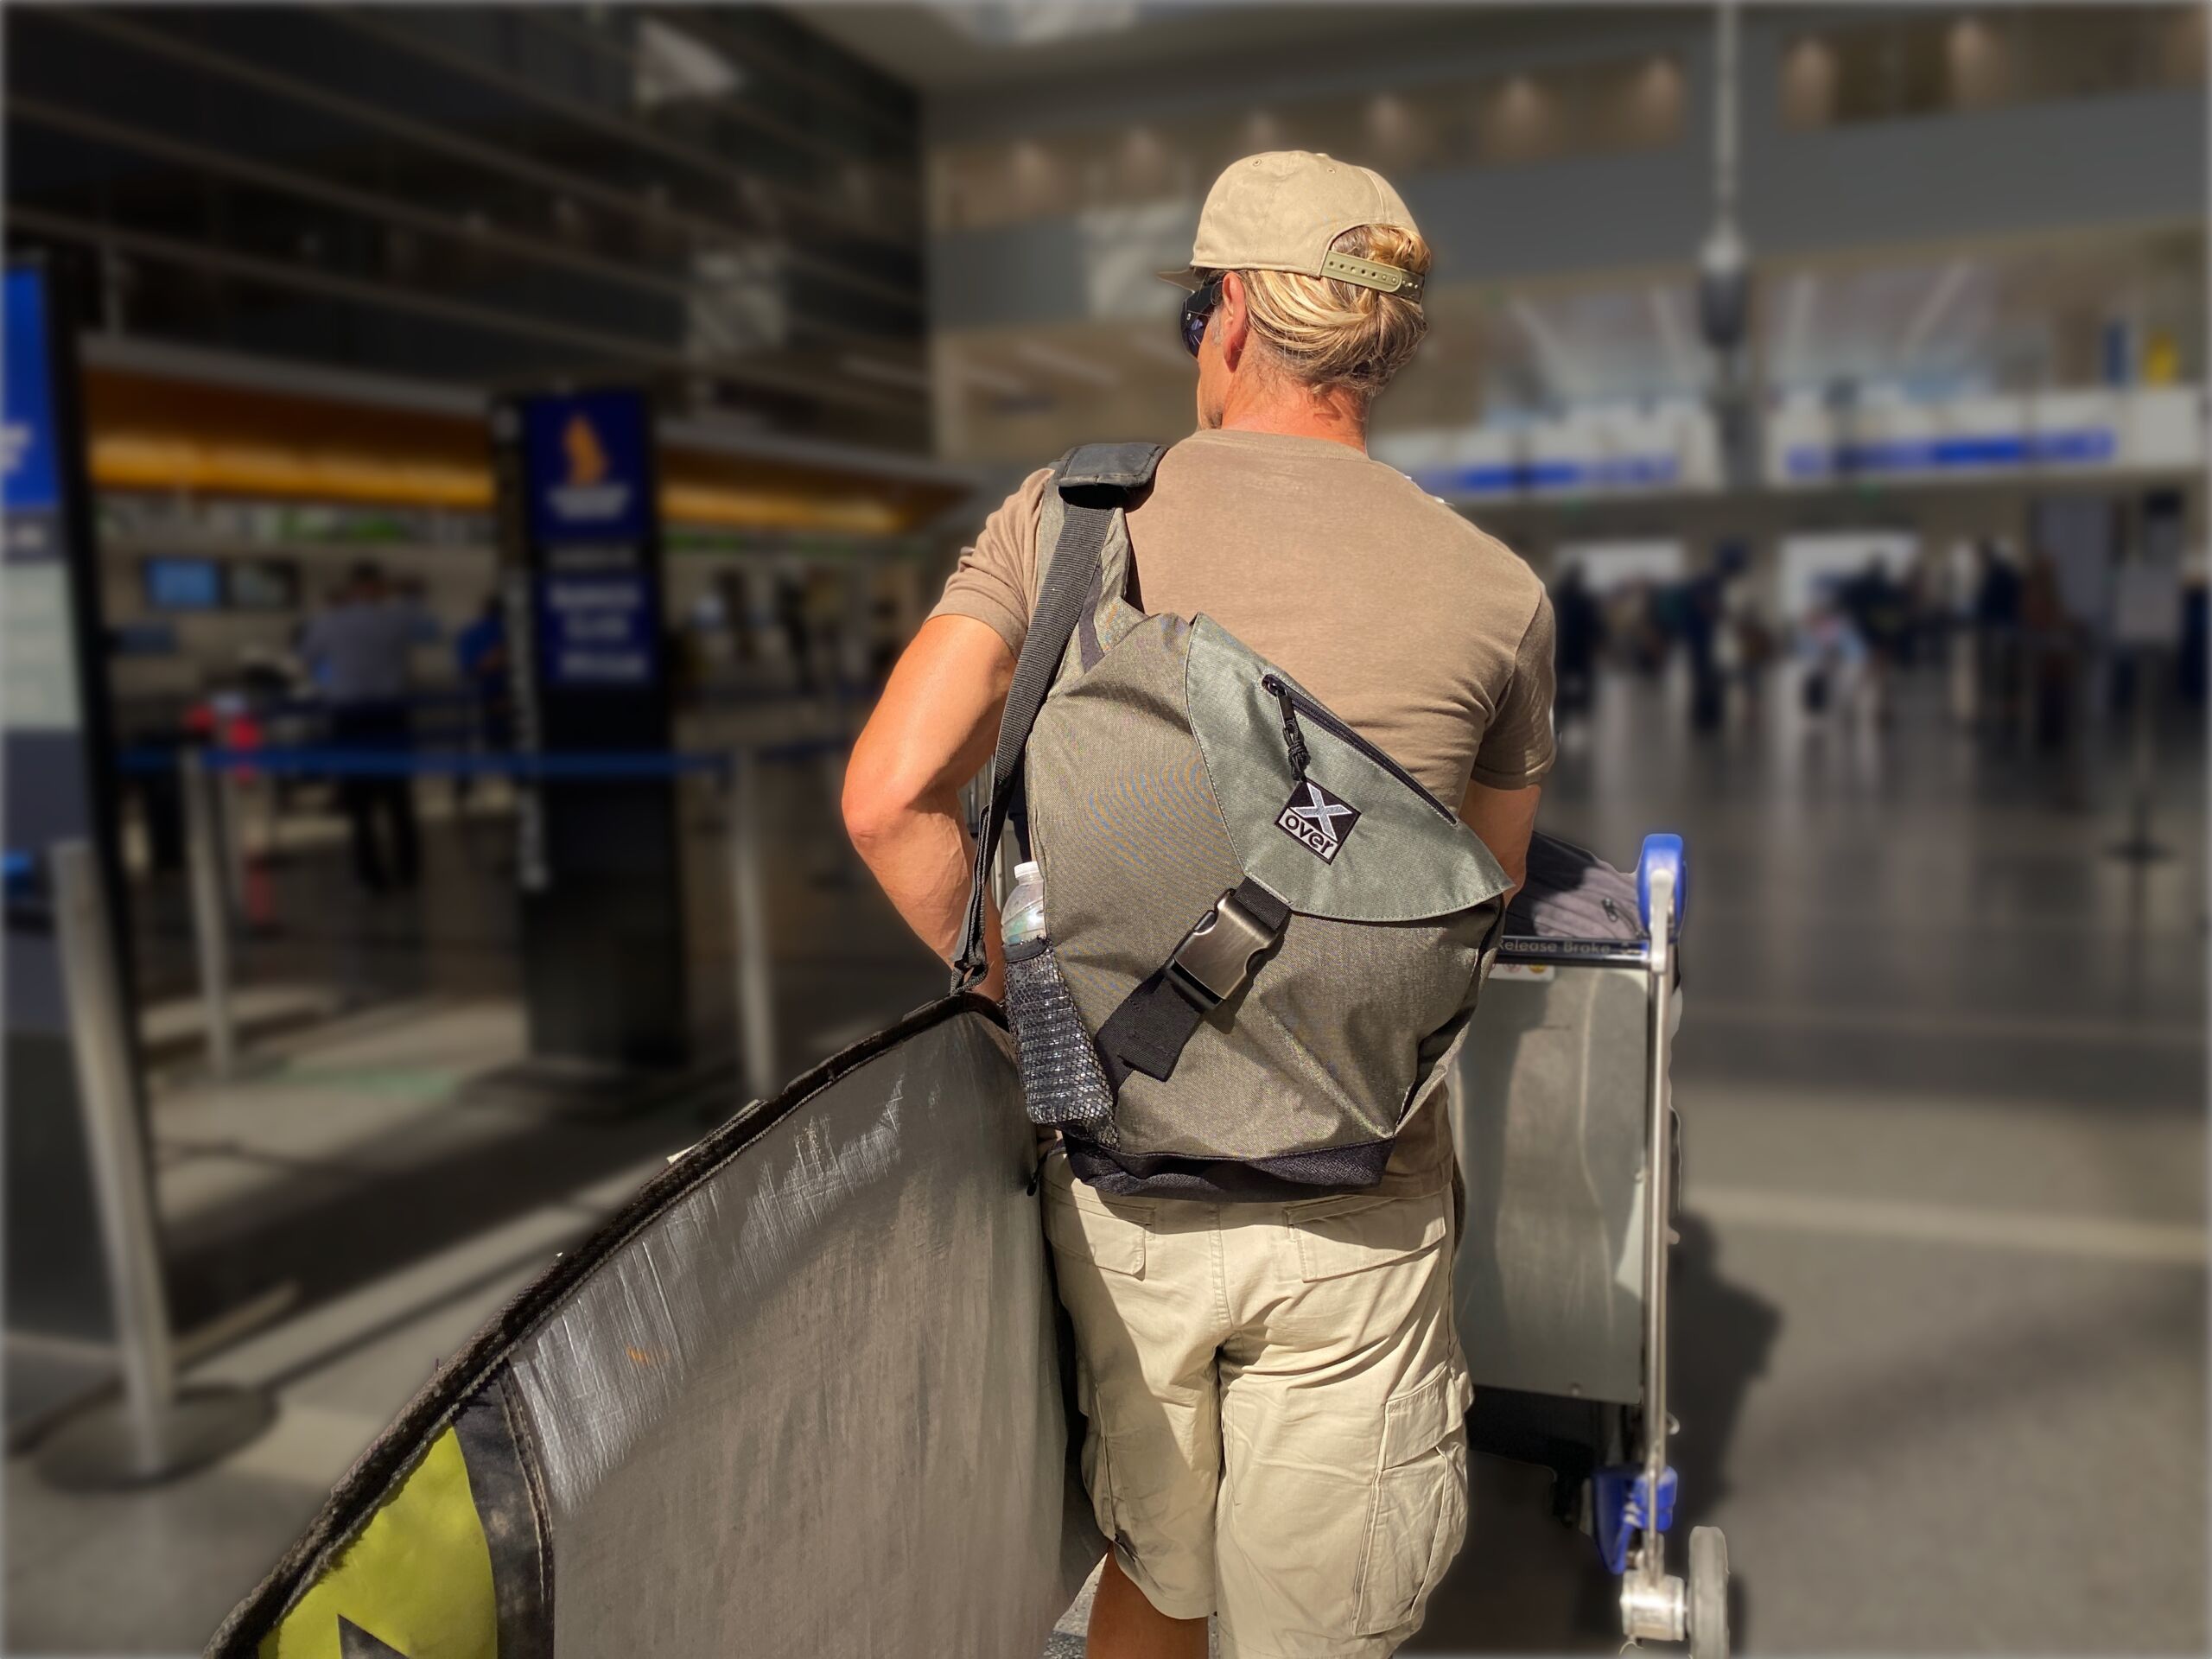 Man wearing X-over bag checking in at the airport